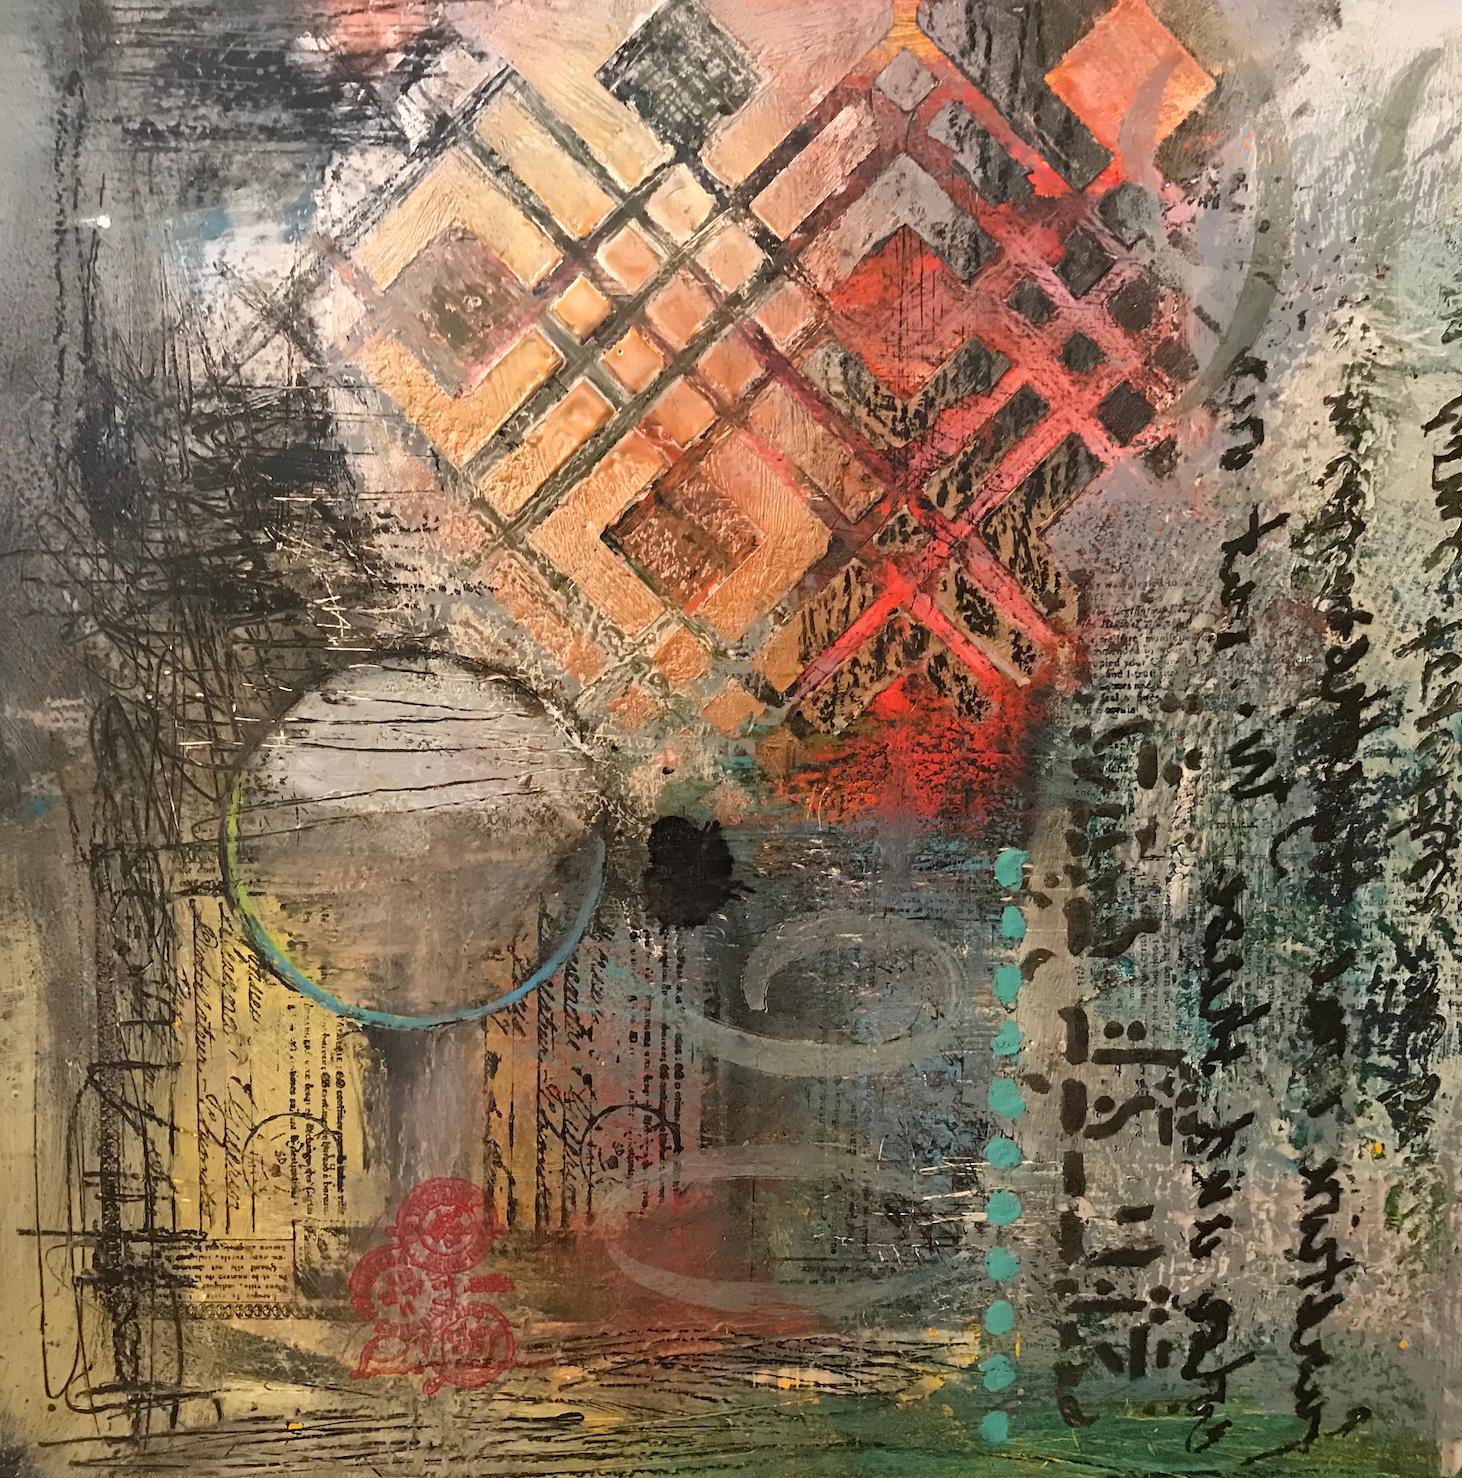 Mary Marley's “It's a Possibility” is an encaustic painting measuring 12 x 12 x 2 inches.  It is painted on a birch panel with encaustic and oil paint creating a textured layered surface in gray and blue with soft tones of orange and yellow